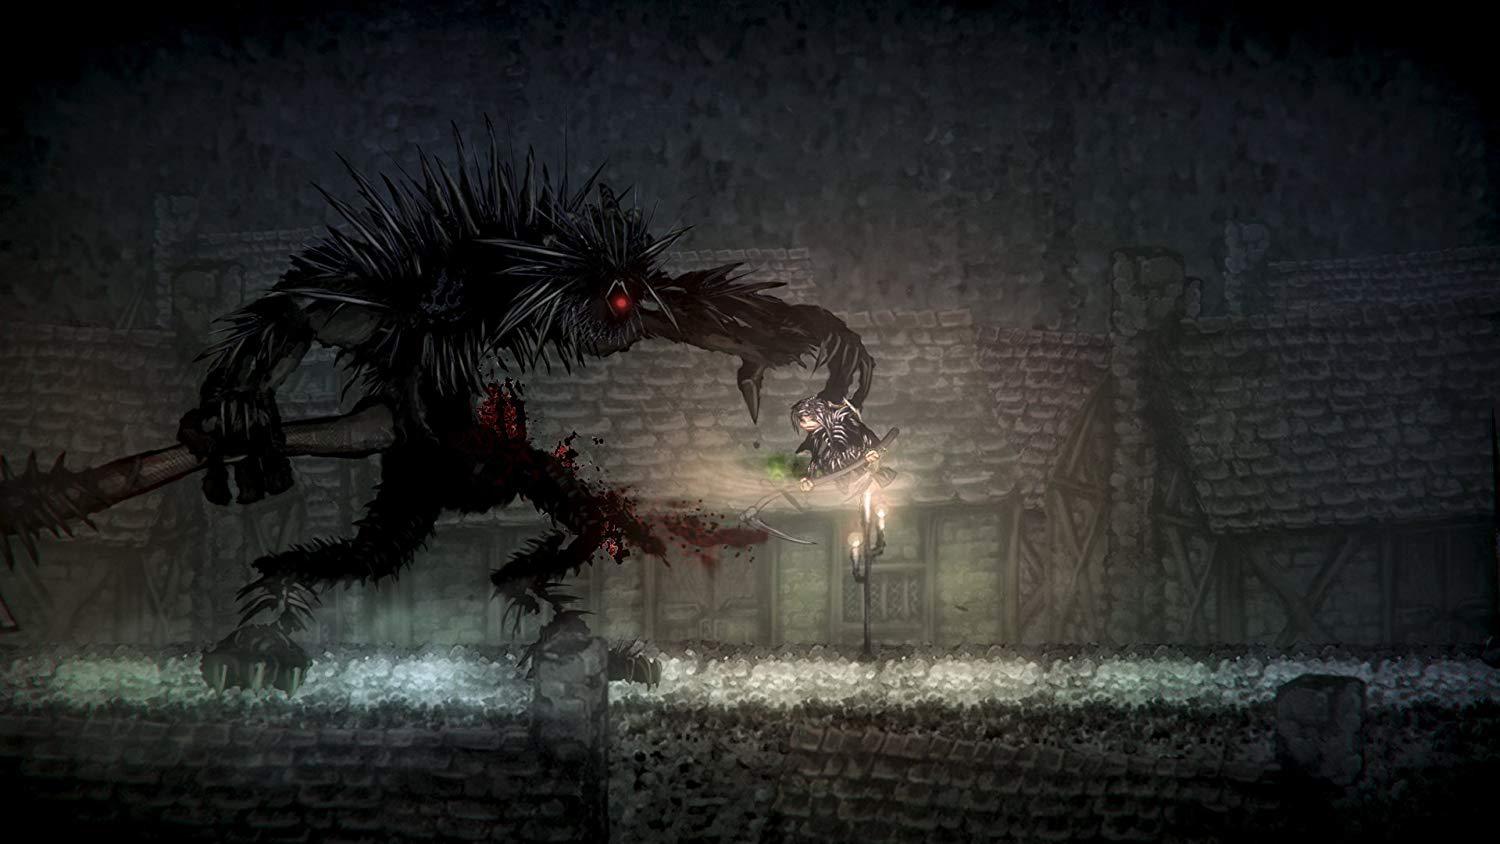 Screenshot for the game Salt and Sanctuary v.1.0.0.8 (2016)